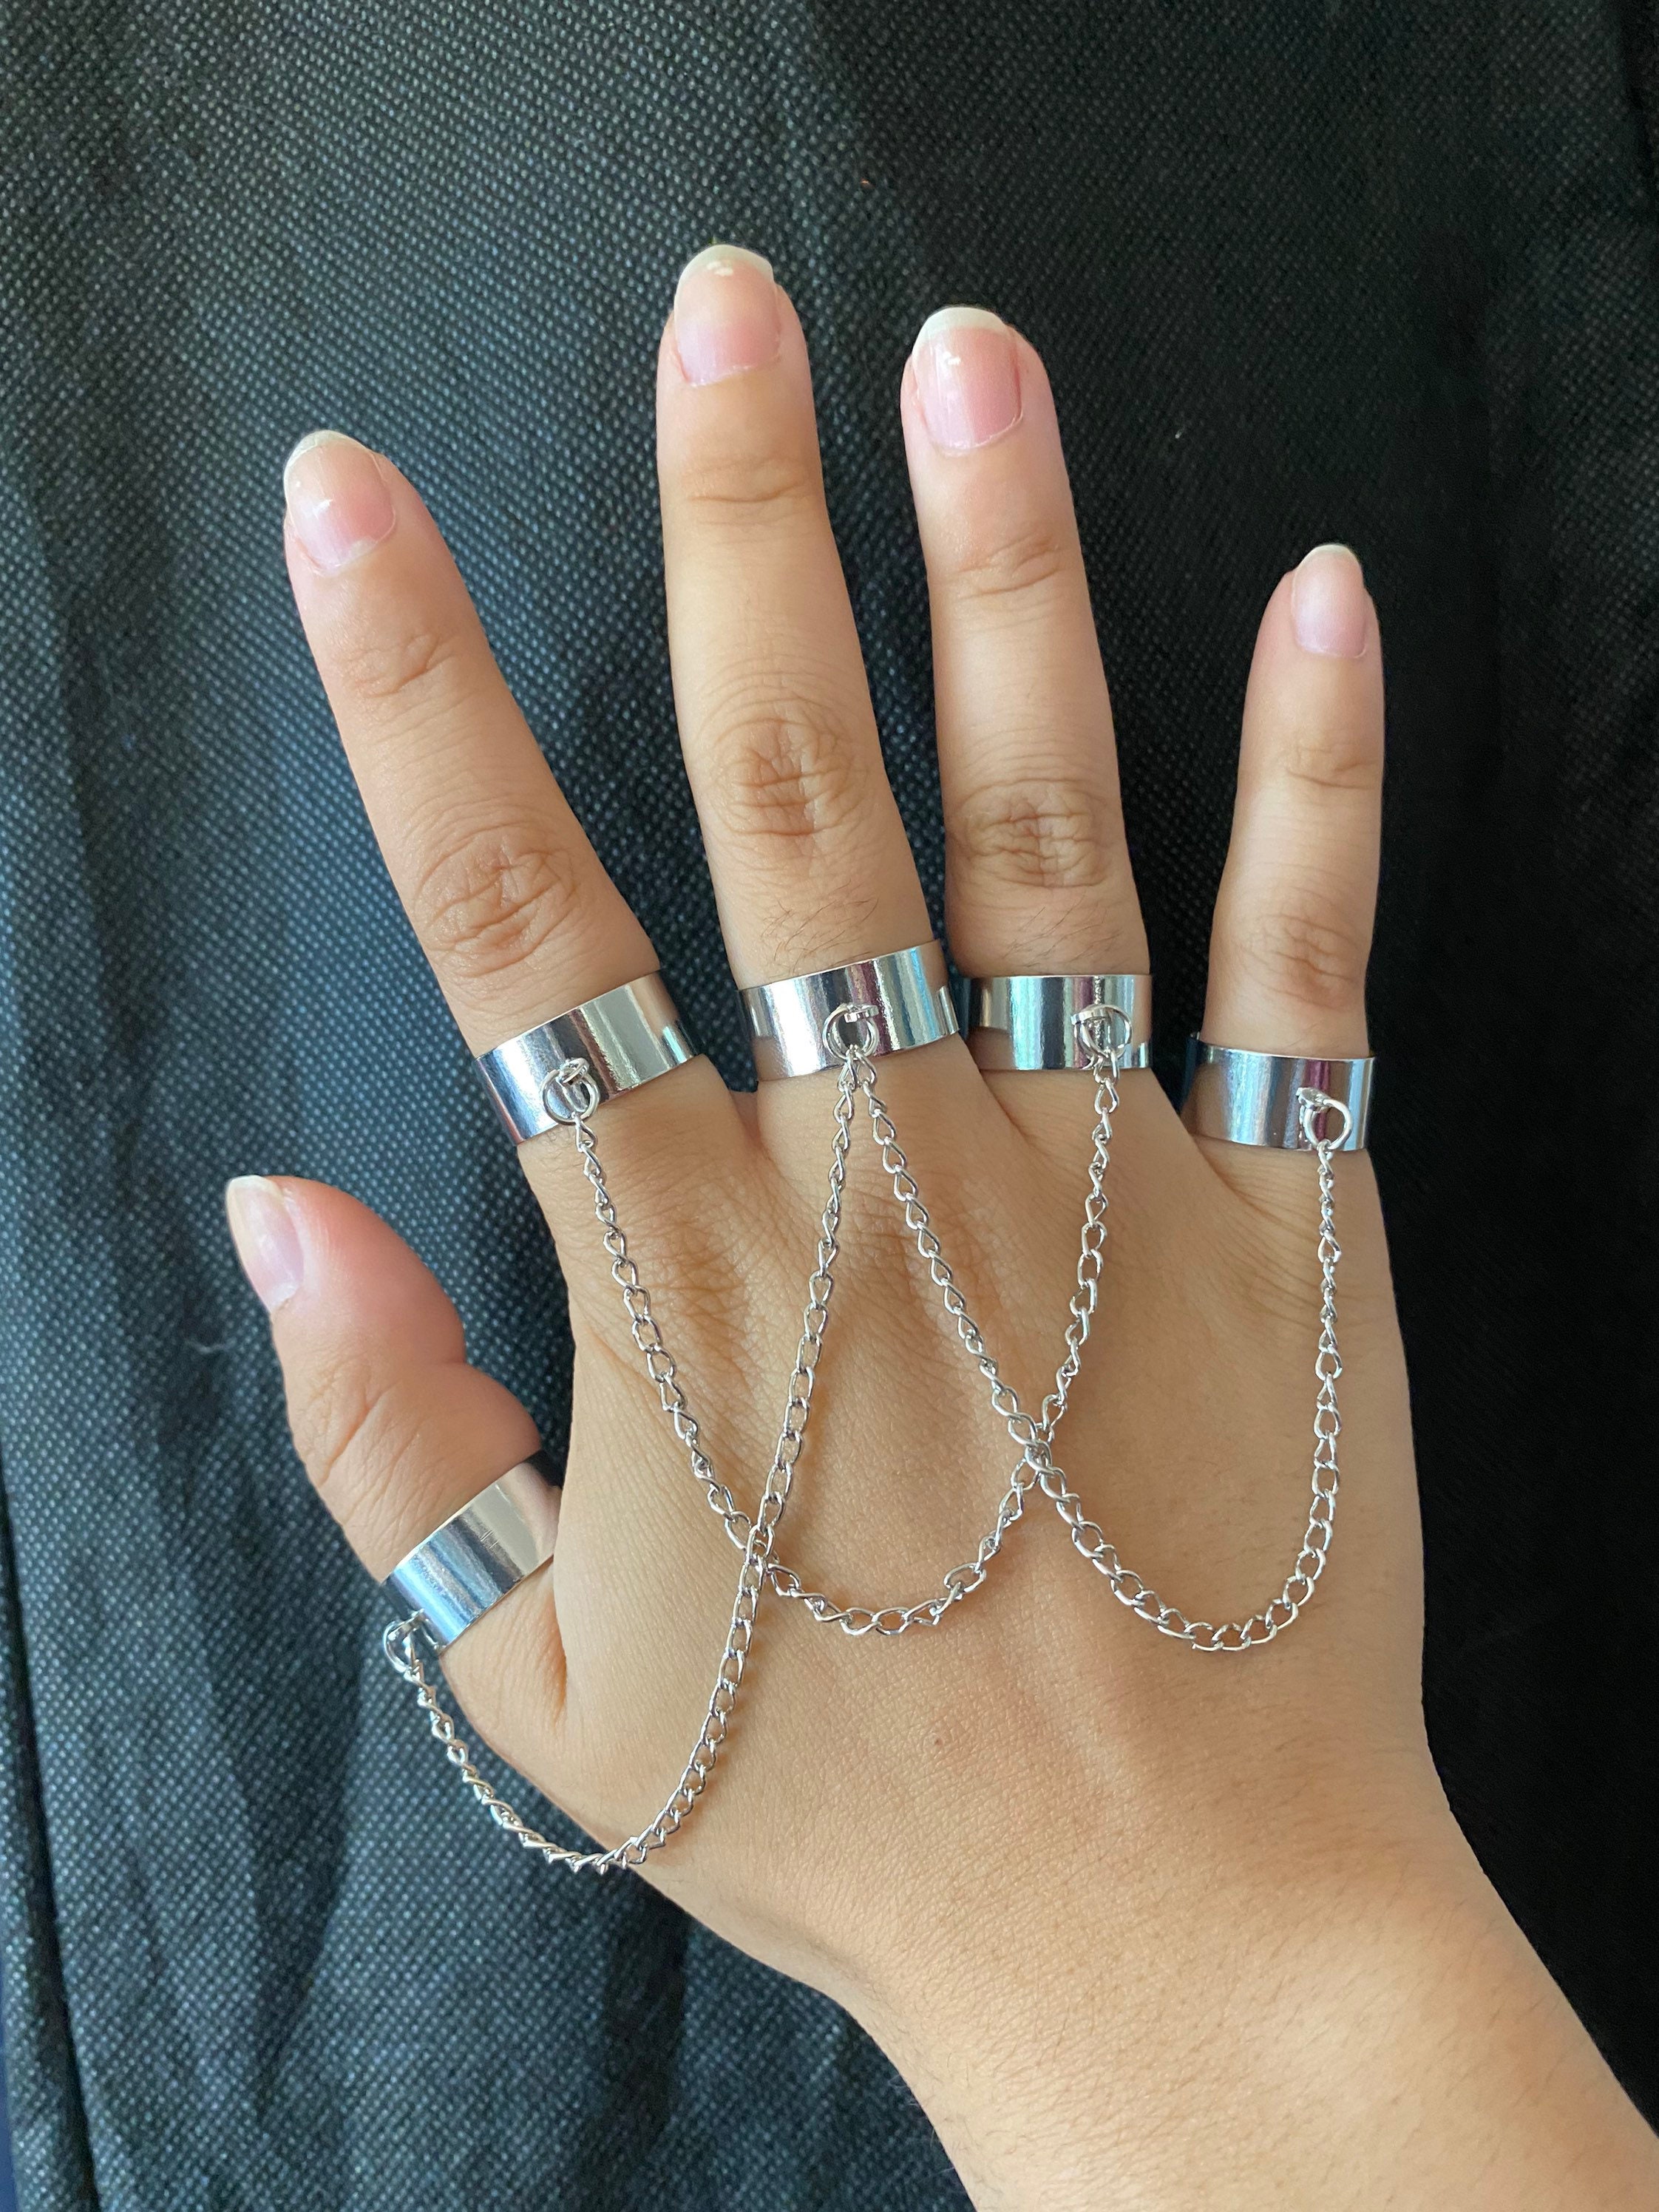 Handmade Five Finger Chain Rings Adjustable Cross Chain Linked Cuff Rings -   Norway